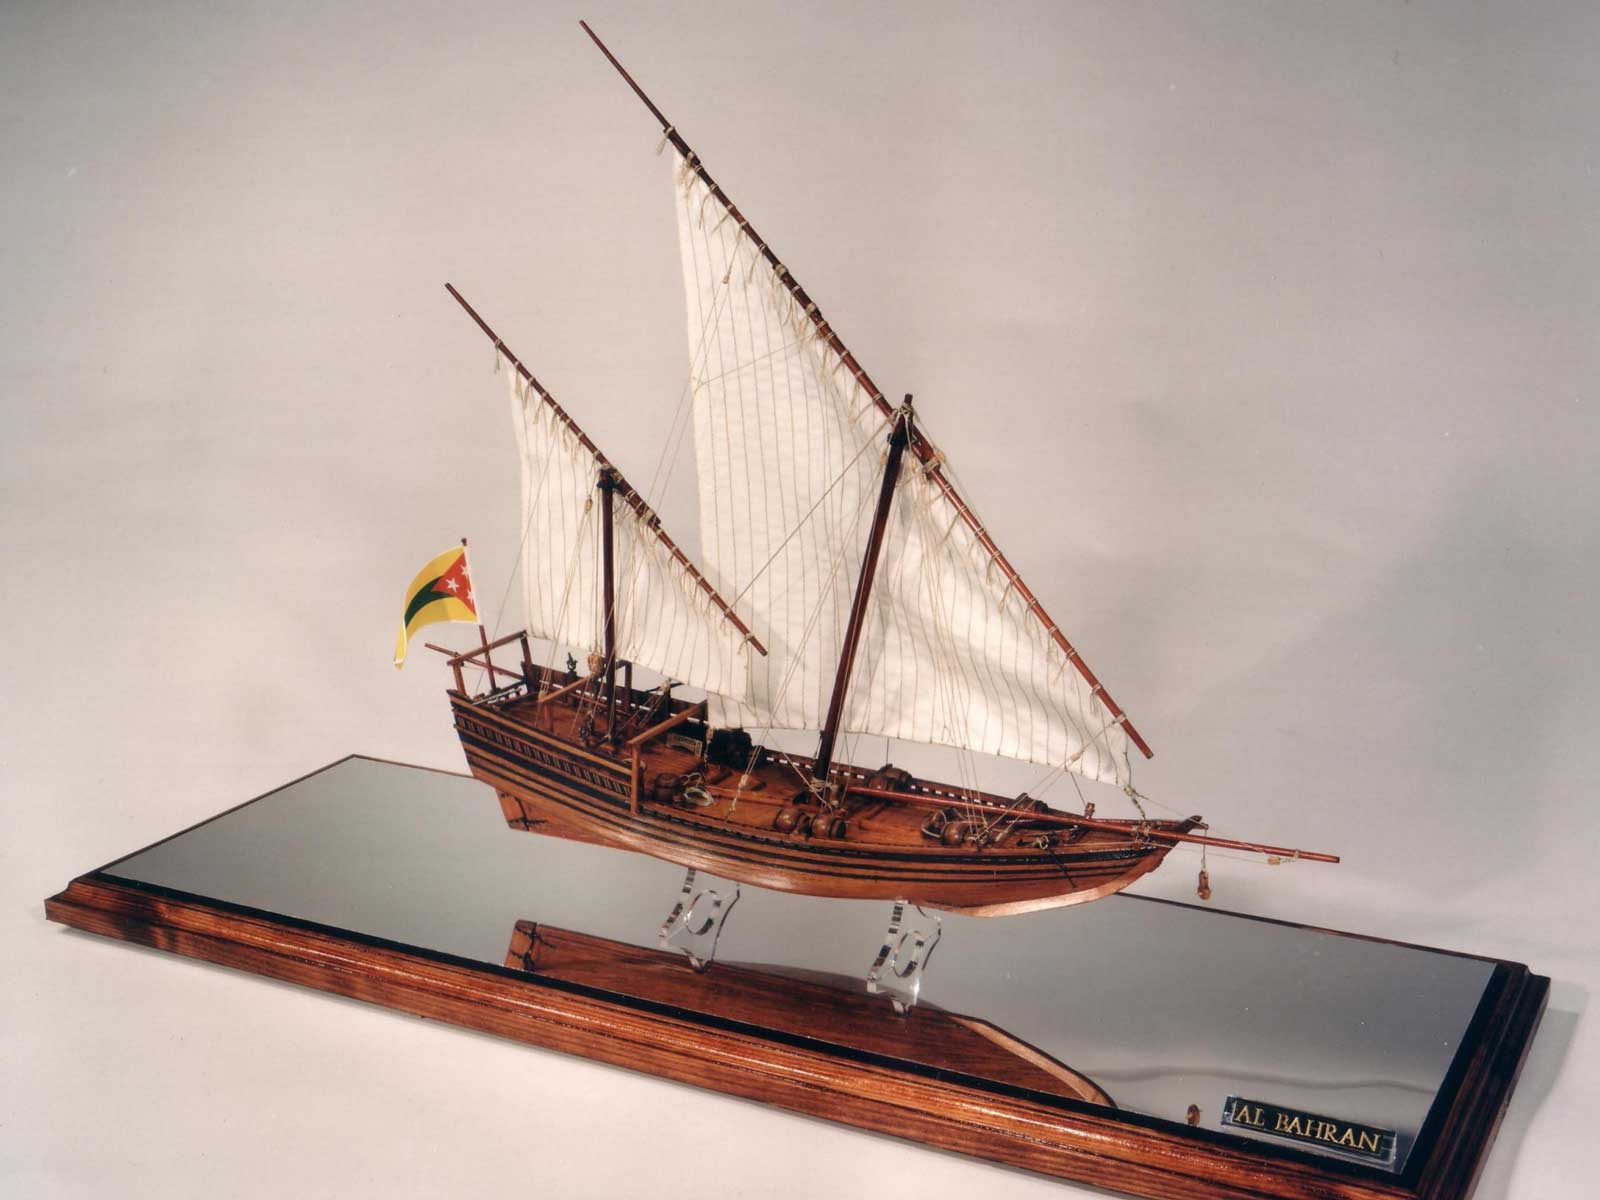 Photograph of a model boat presented as a gift to the King Of Bahrain